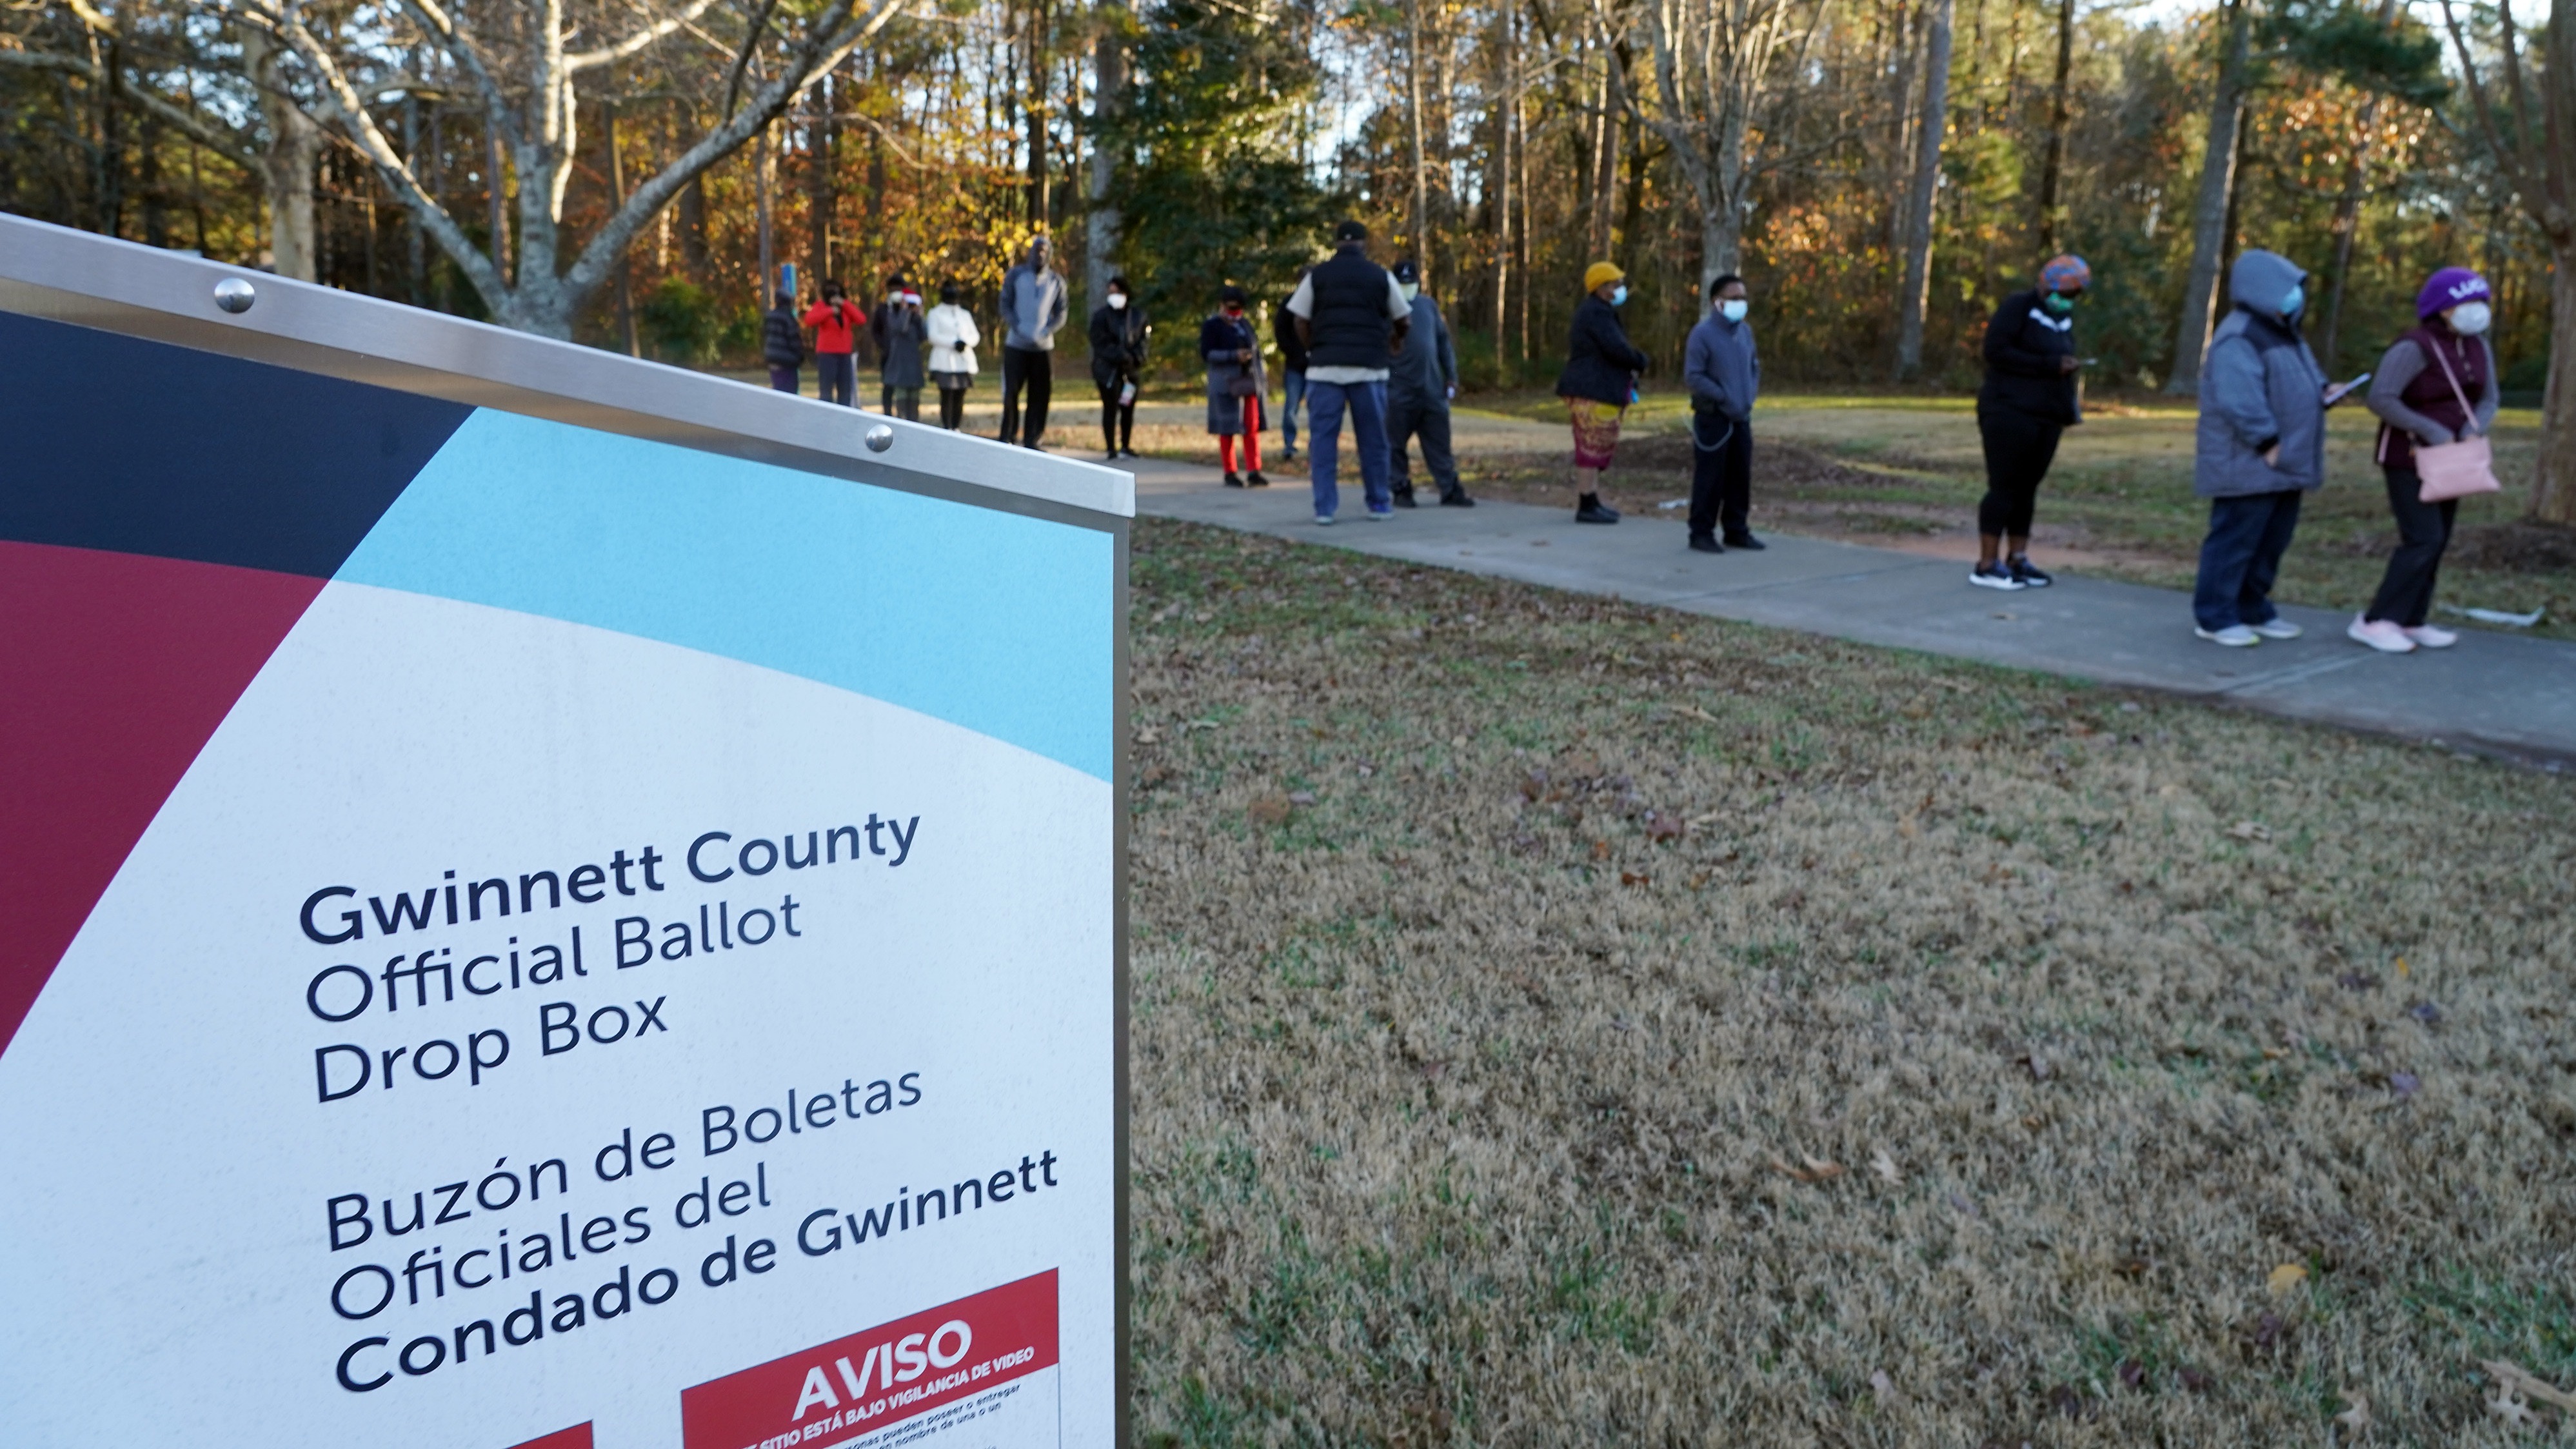 Voters stand in line to cast their ballots during the first day of early voting in the U.S. Senate runoffs at Lenora Park in Atlanta in December 2020. CREDIT: Tami Chappell/AFP via Getty Images